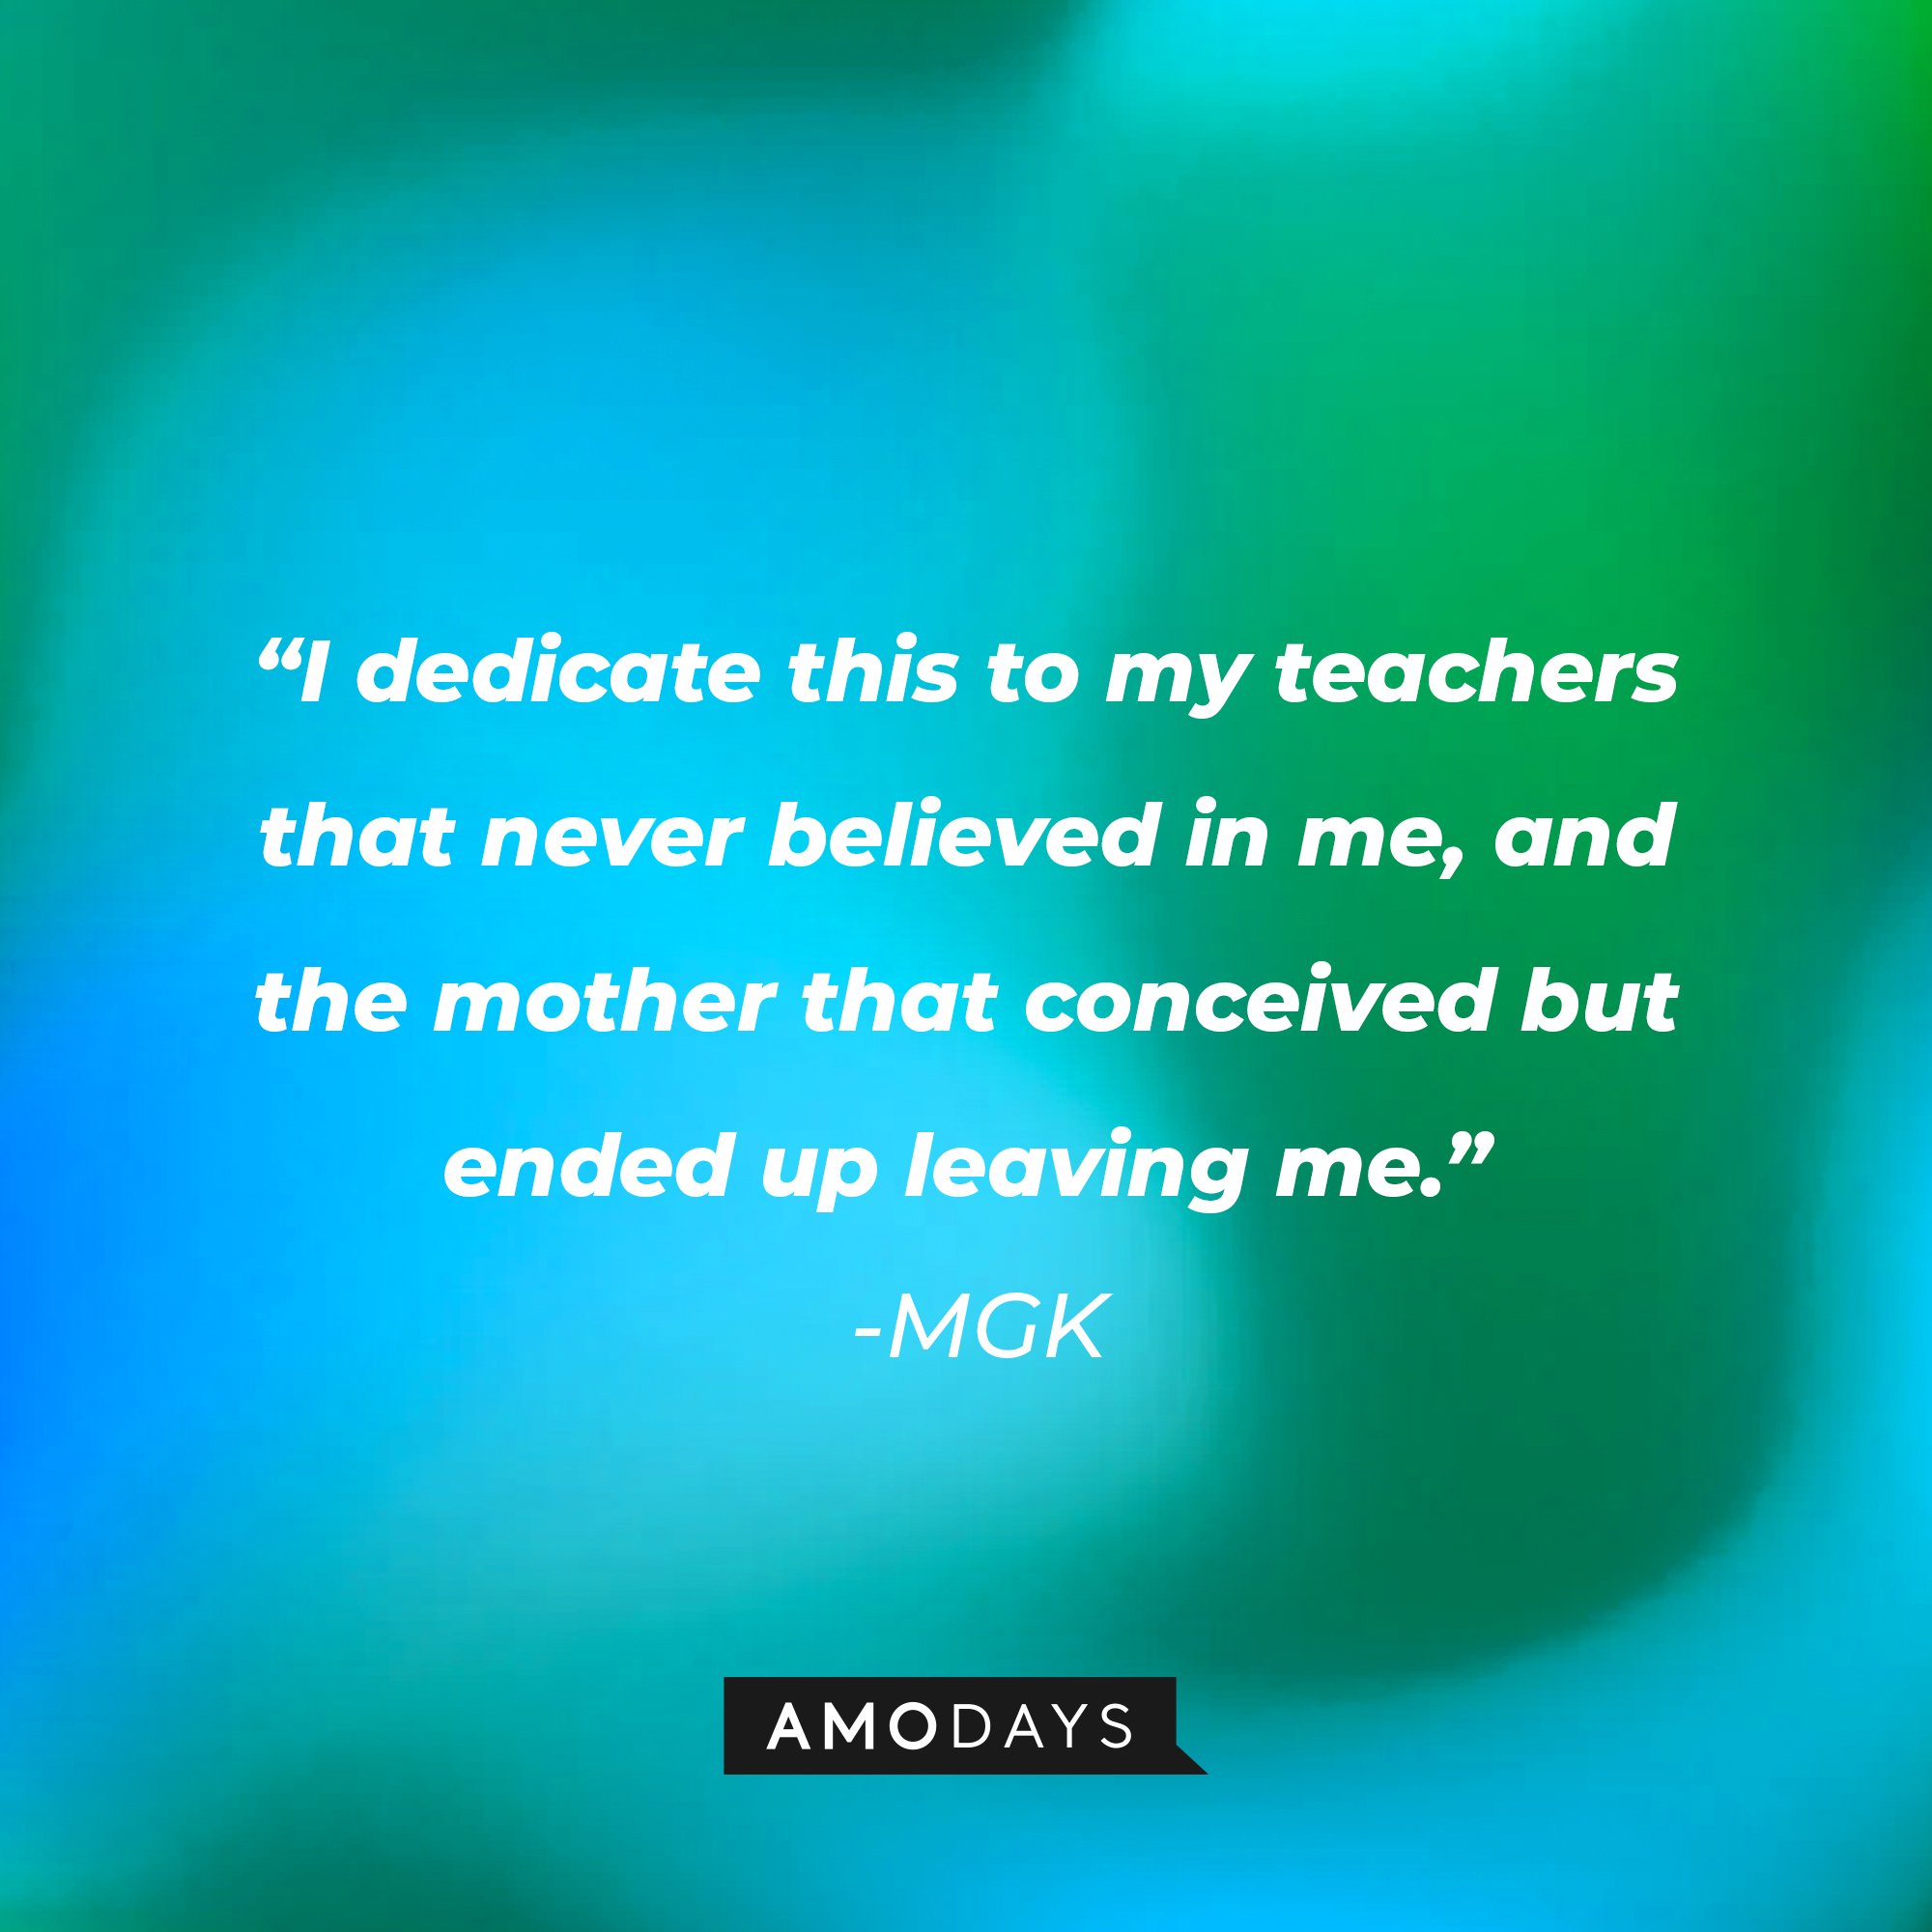 MGK's quote: "I dedicate this to my teachers that never believed in me, and the mother that conceived but ended up leaving me." | Image: AmoDays